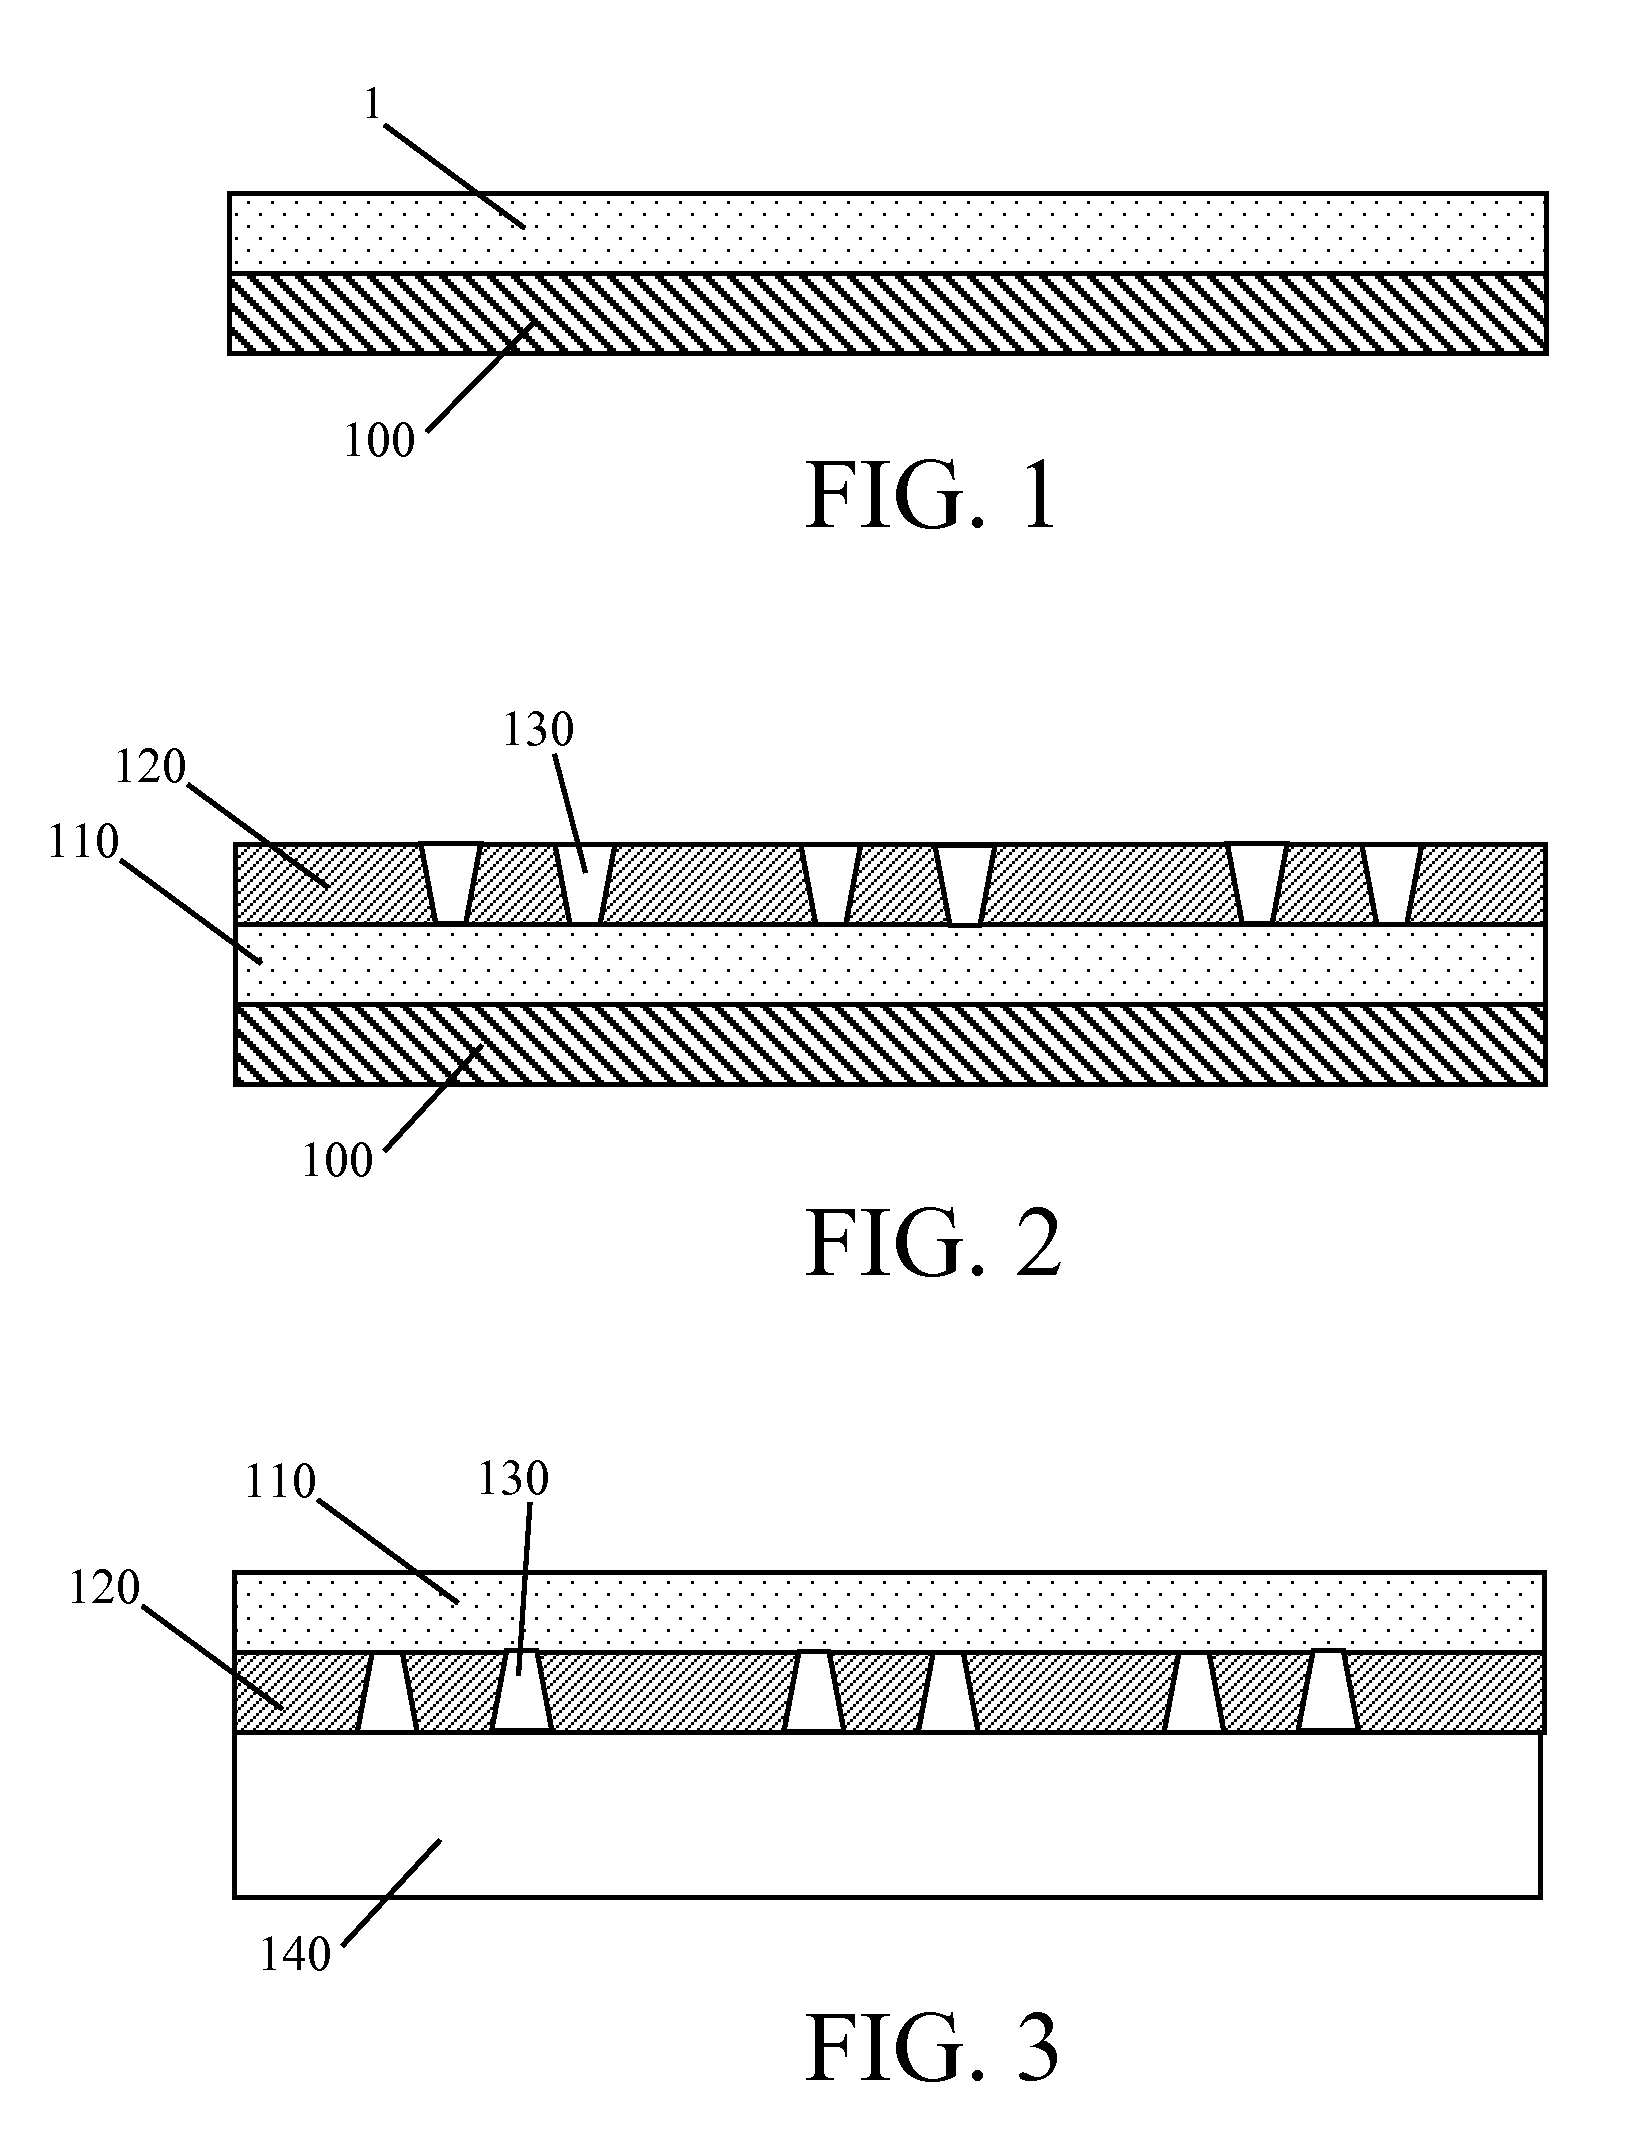 Method of producing encapsulated IC devices on a wafer